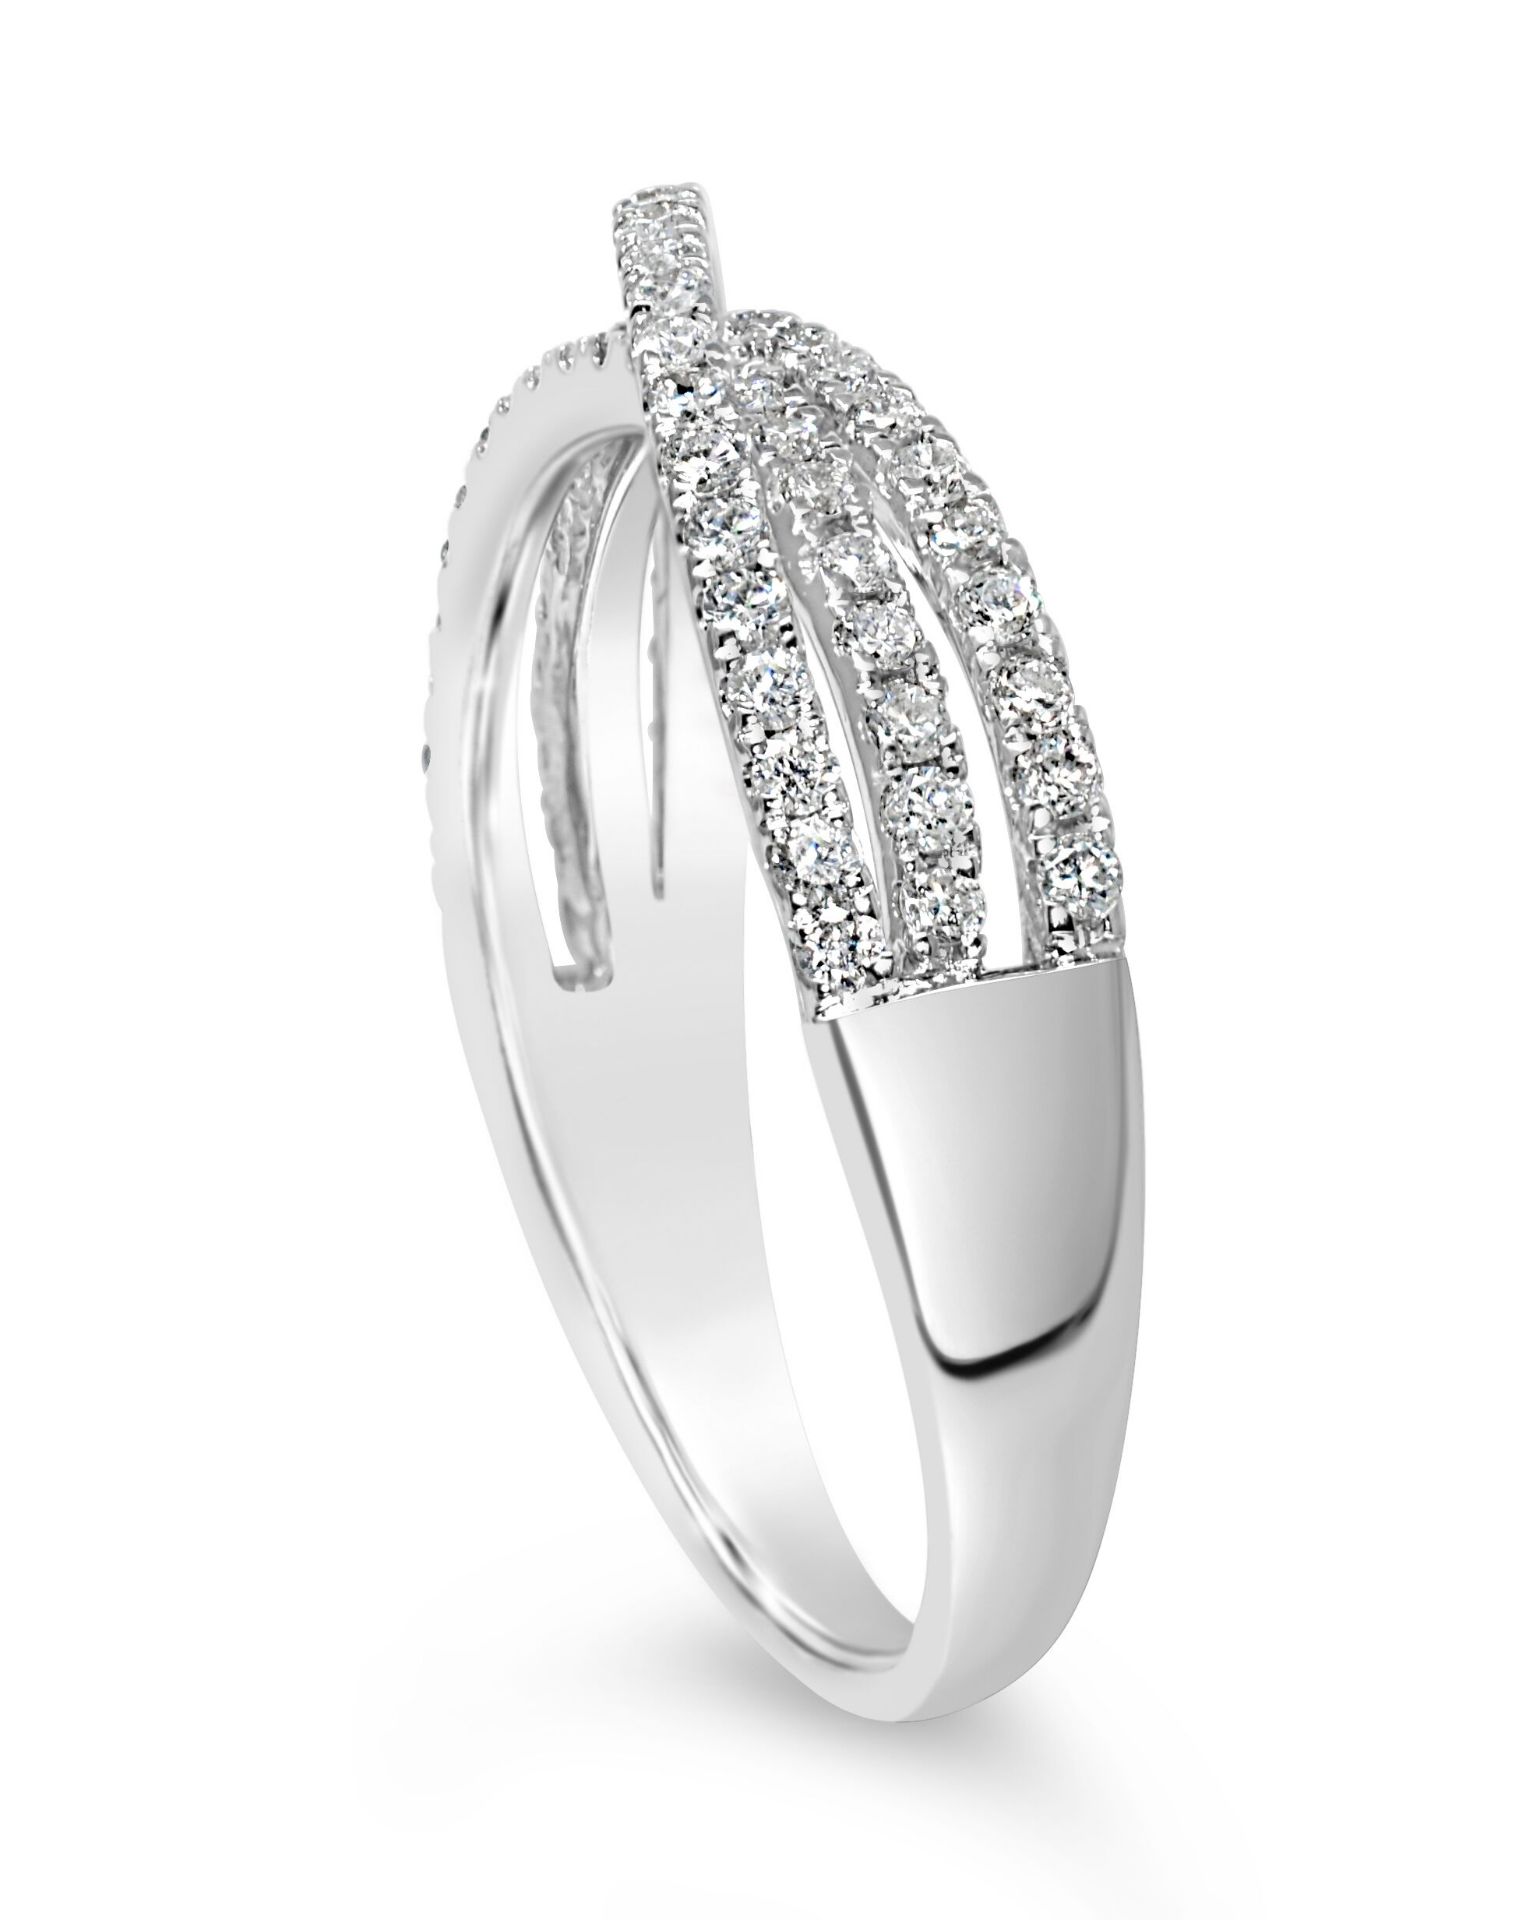 Diamond Eternity Ring For Women in White Gold with - Image 3 of 4